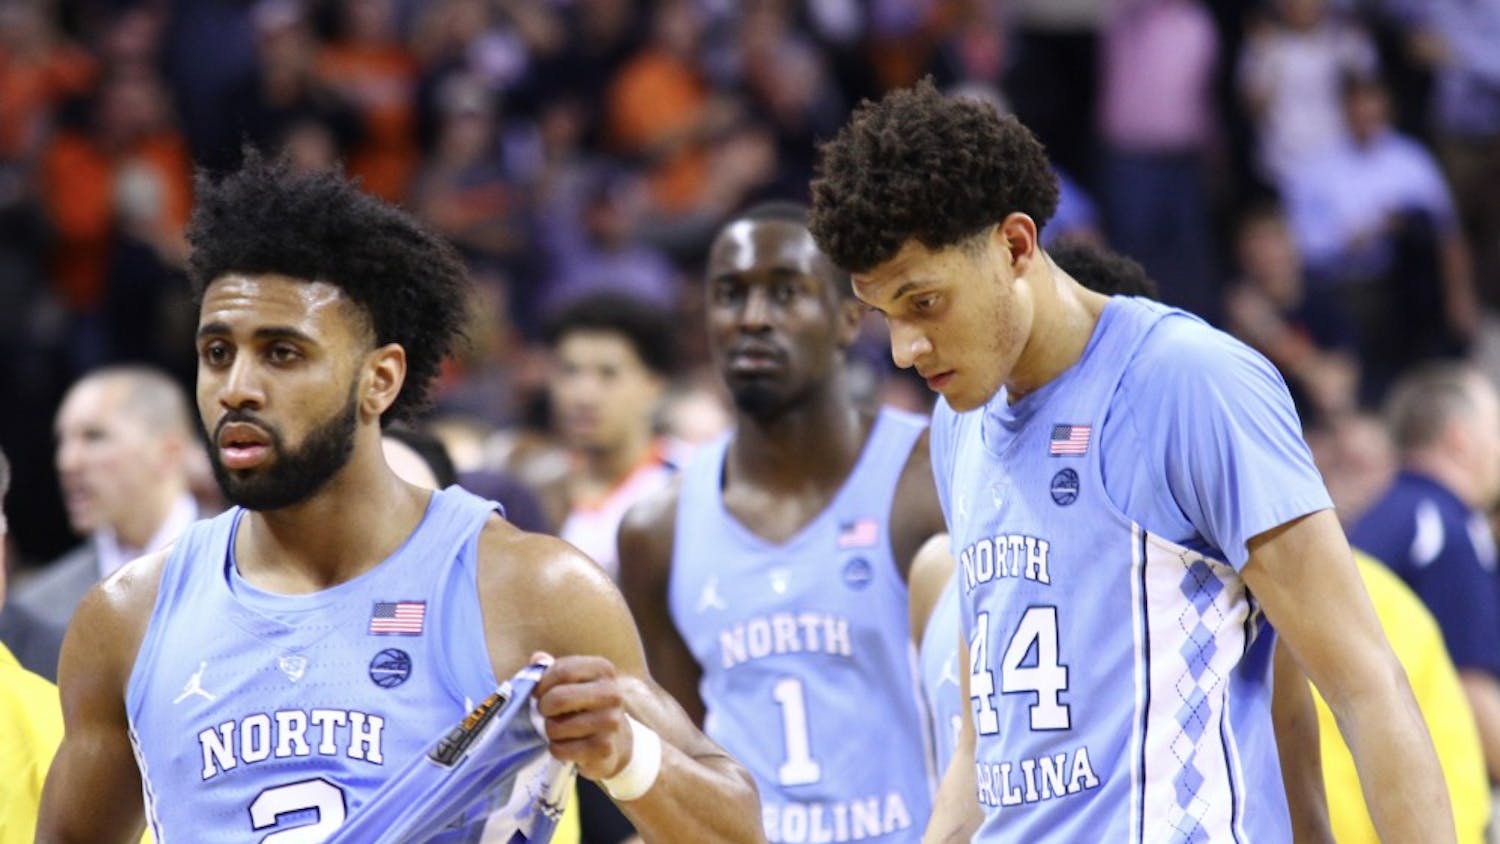 North Carolina&nbsp;guard Joel Berry (2) and wings Justin Jackson (44) and Theo Pinson (1) walk back to the locker room after&nbsp;losing to UVA 53-43 on Monday.&nbsp;